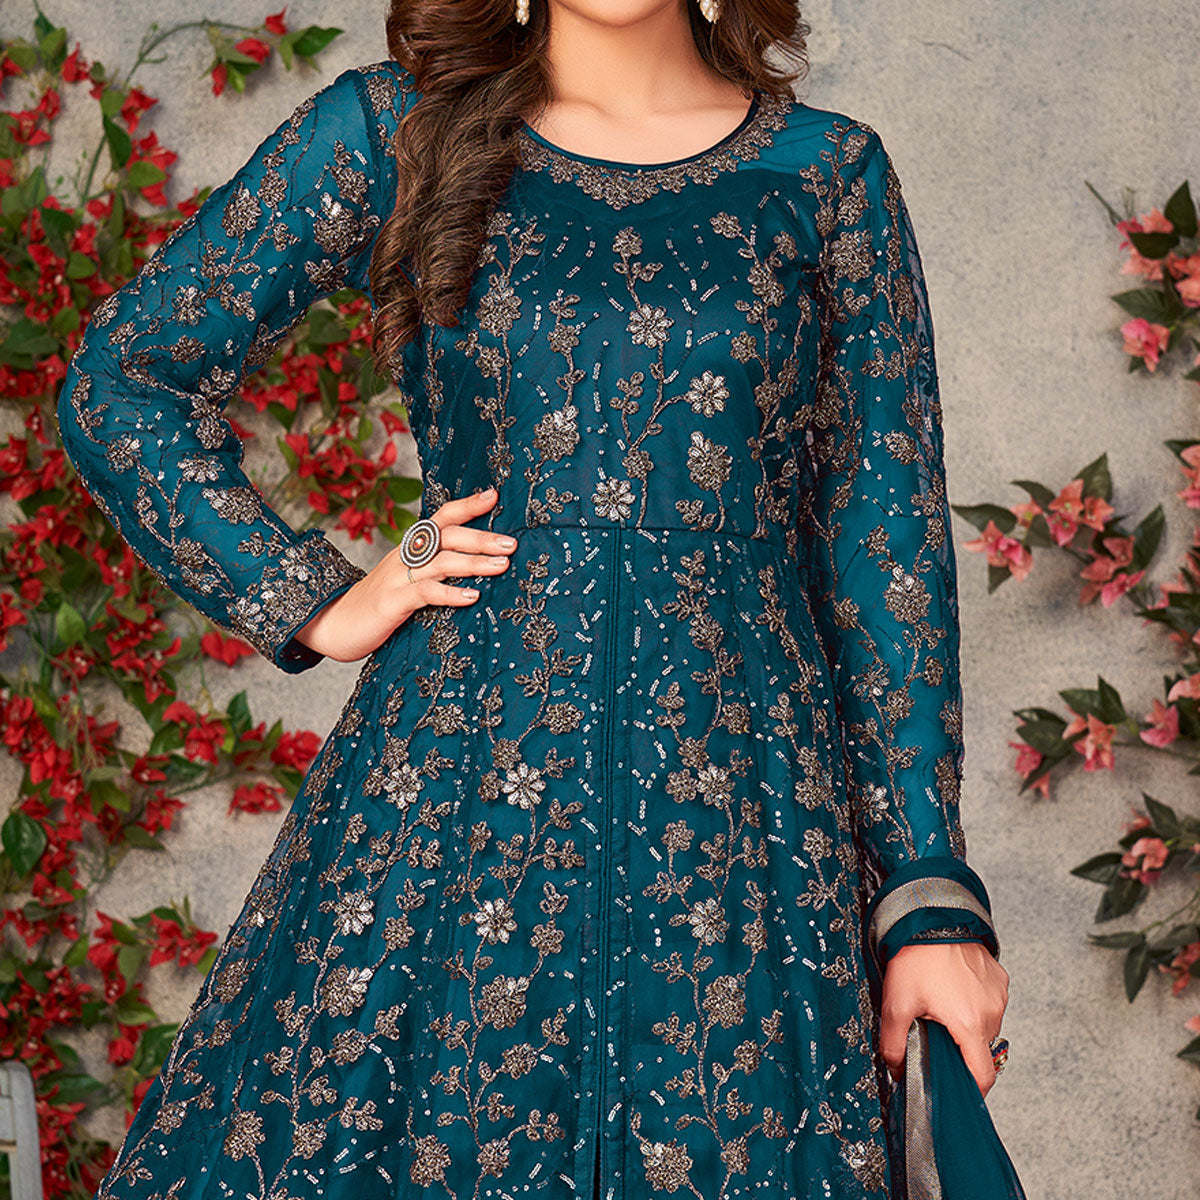 Morpich Embroidered Net Semi Stitched Anarkali Style Suit